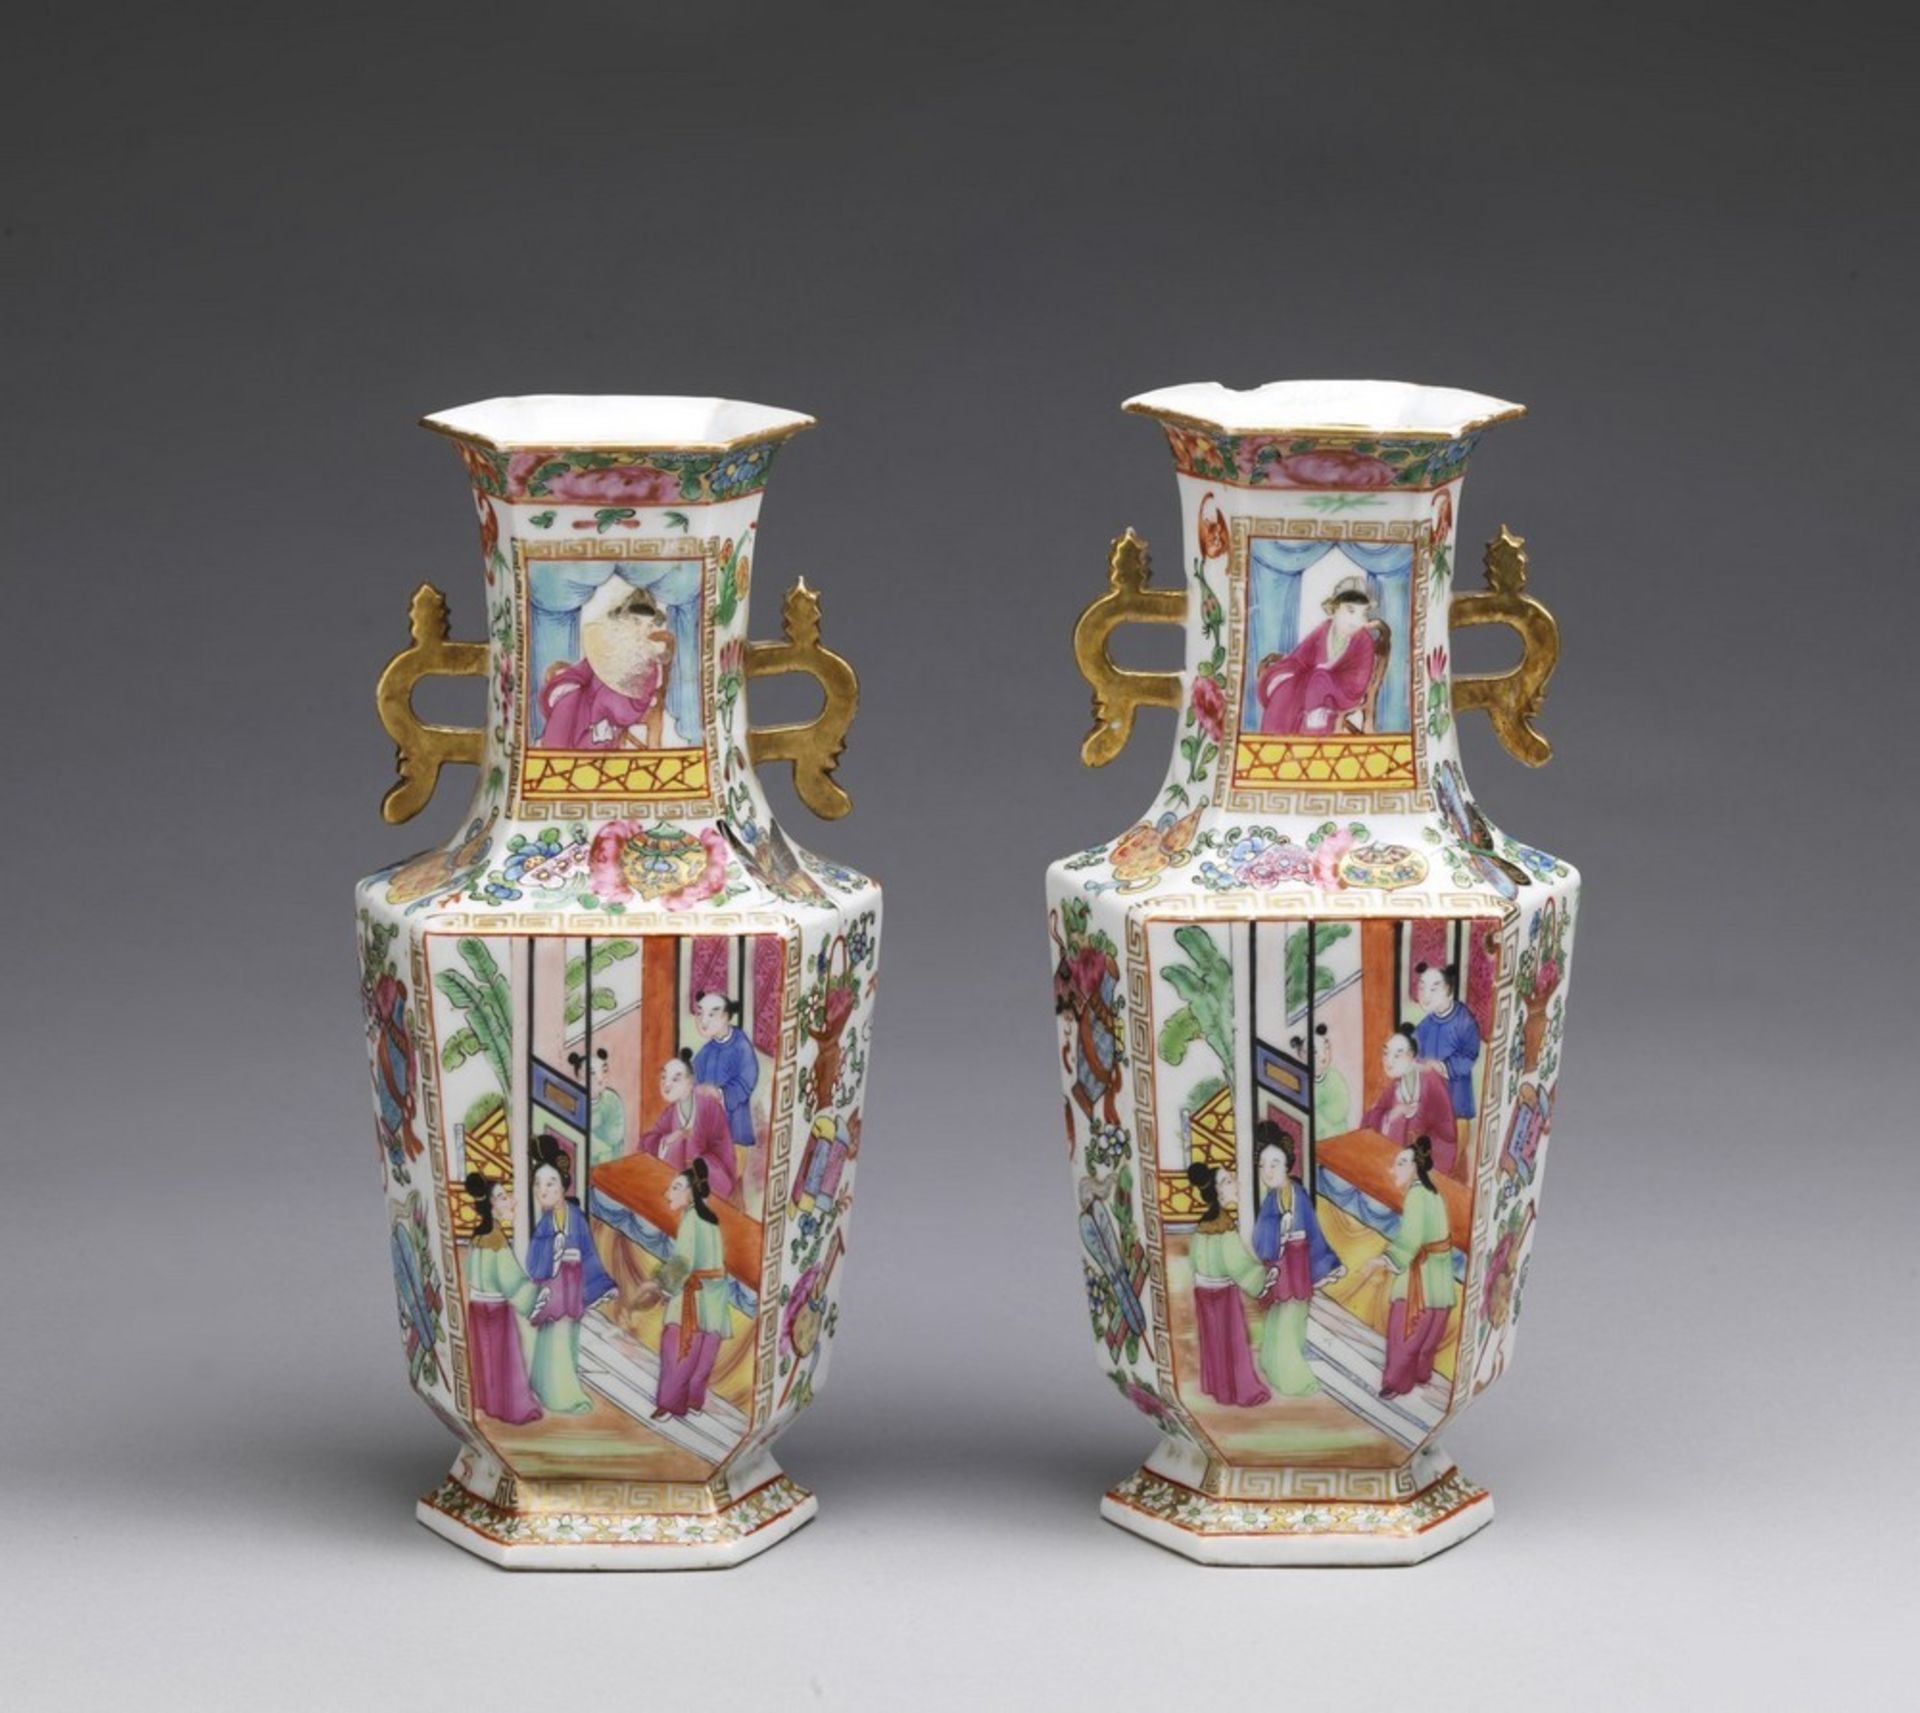 Arte Cinese A pair of porcelain Canton faceted vasesChina, Qing dynasty, early 19th century . - Image 2 of 4